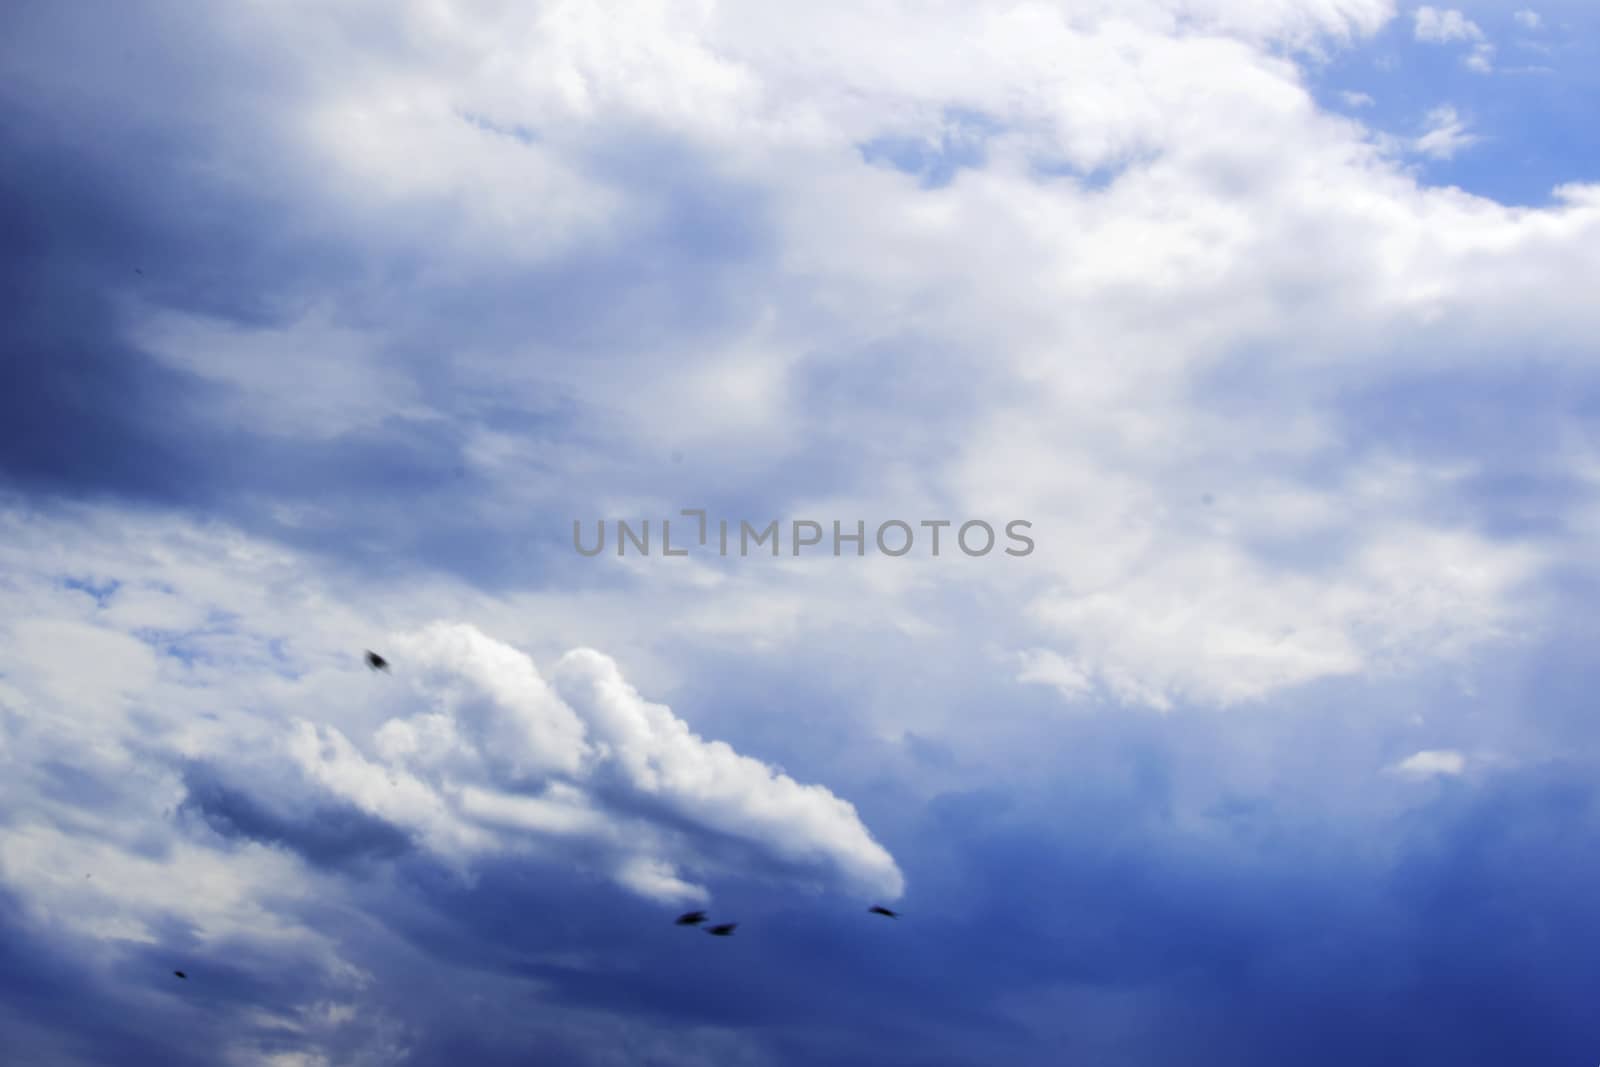 Blue sky with clouds photo. Beautiful picture, background, wallp by wektorygrafika